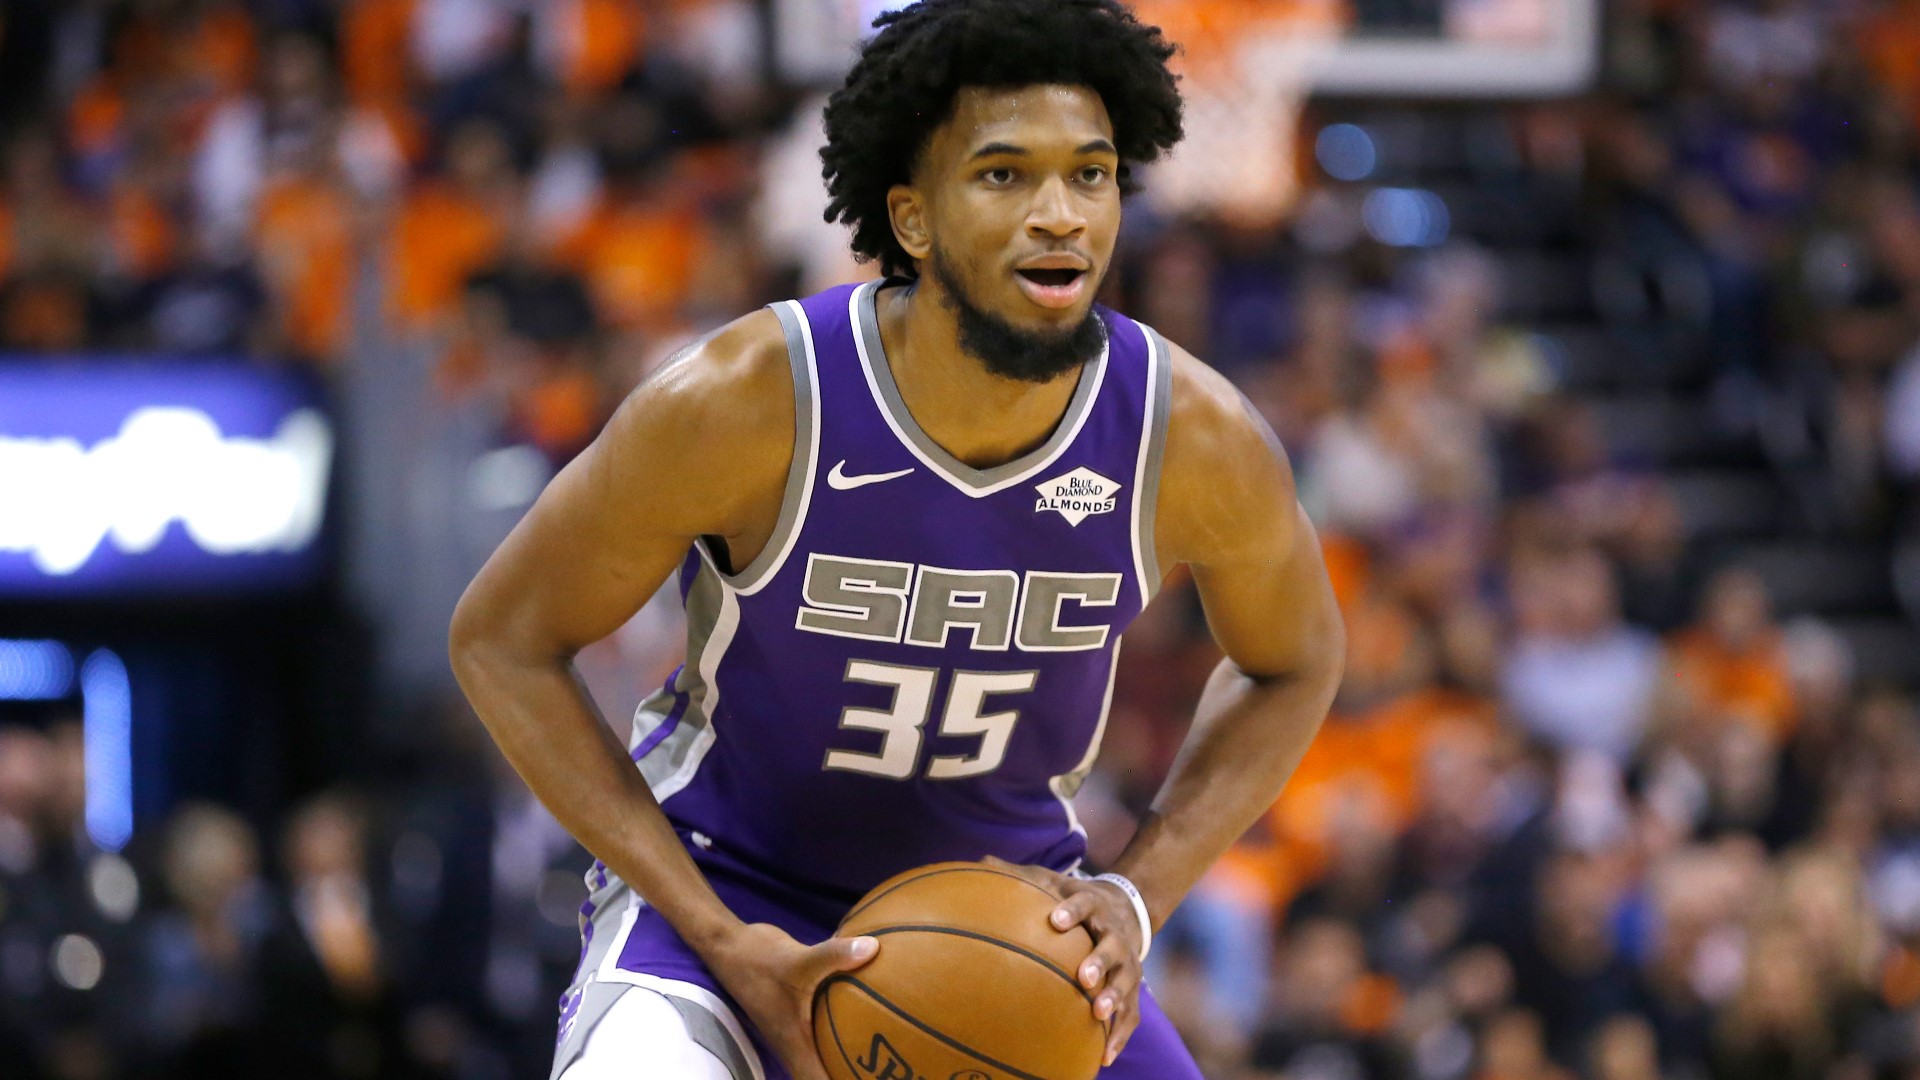 After only appearing in 13 games this season, Kings C Marvin Bagley III says he's healthy and hopes to help boost Sacramento’s playoff push in Orlando.